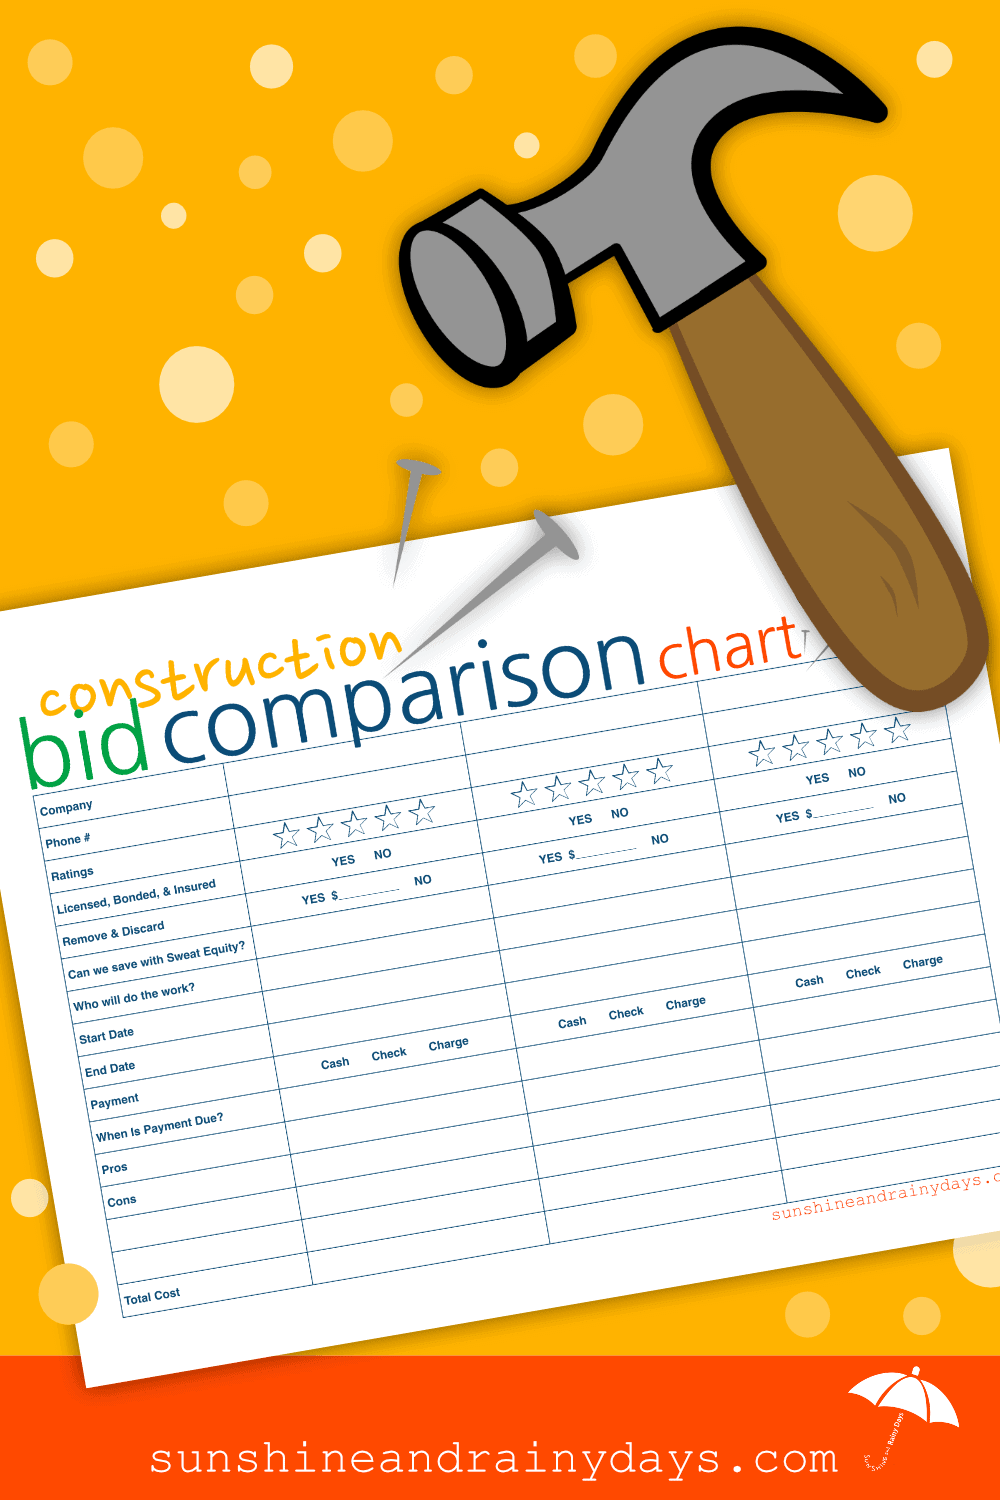 You've done your due diligence and retrieved three bids but how do you know which contractor to hire? Use our construction bid comparison chart, do your homework, research, ask questions, and move forward with confidence!